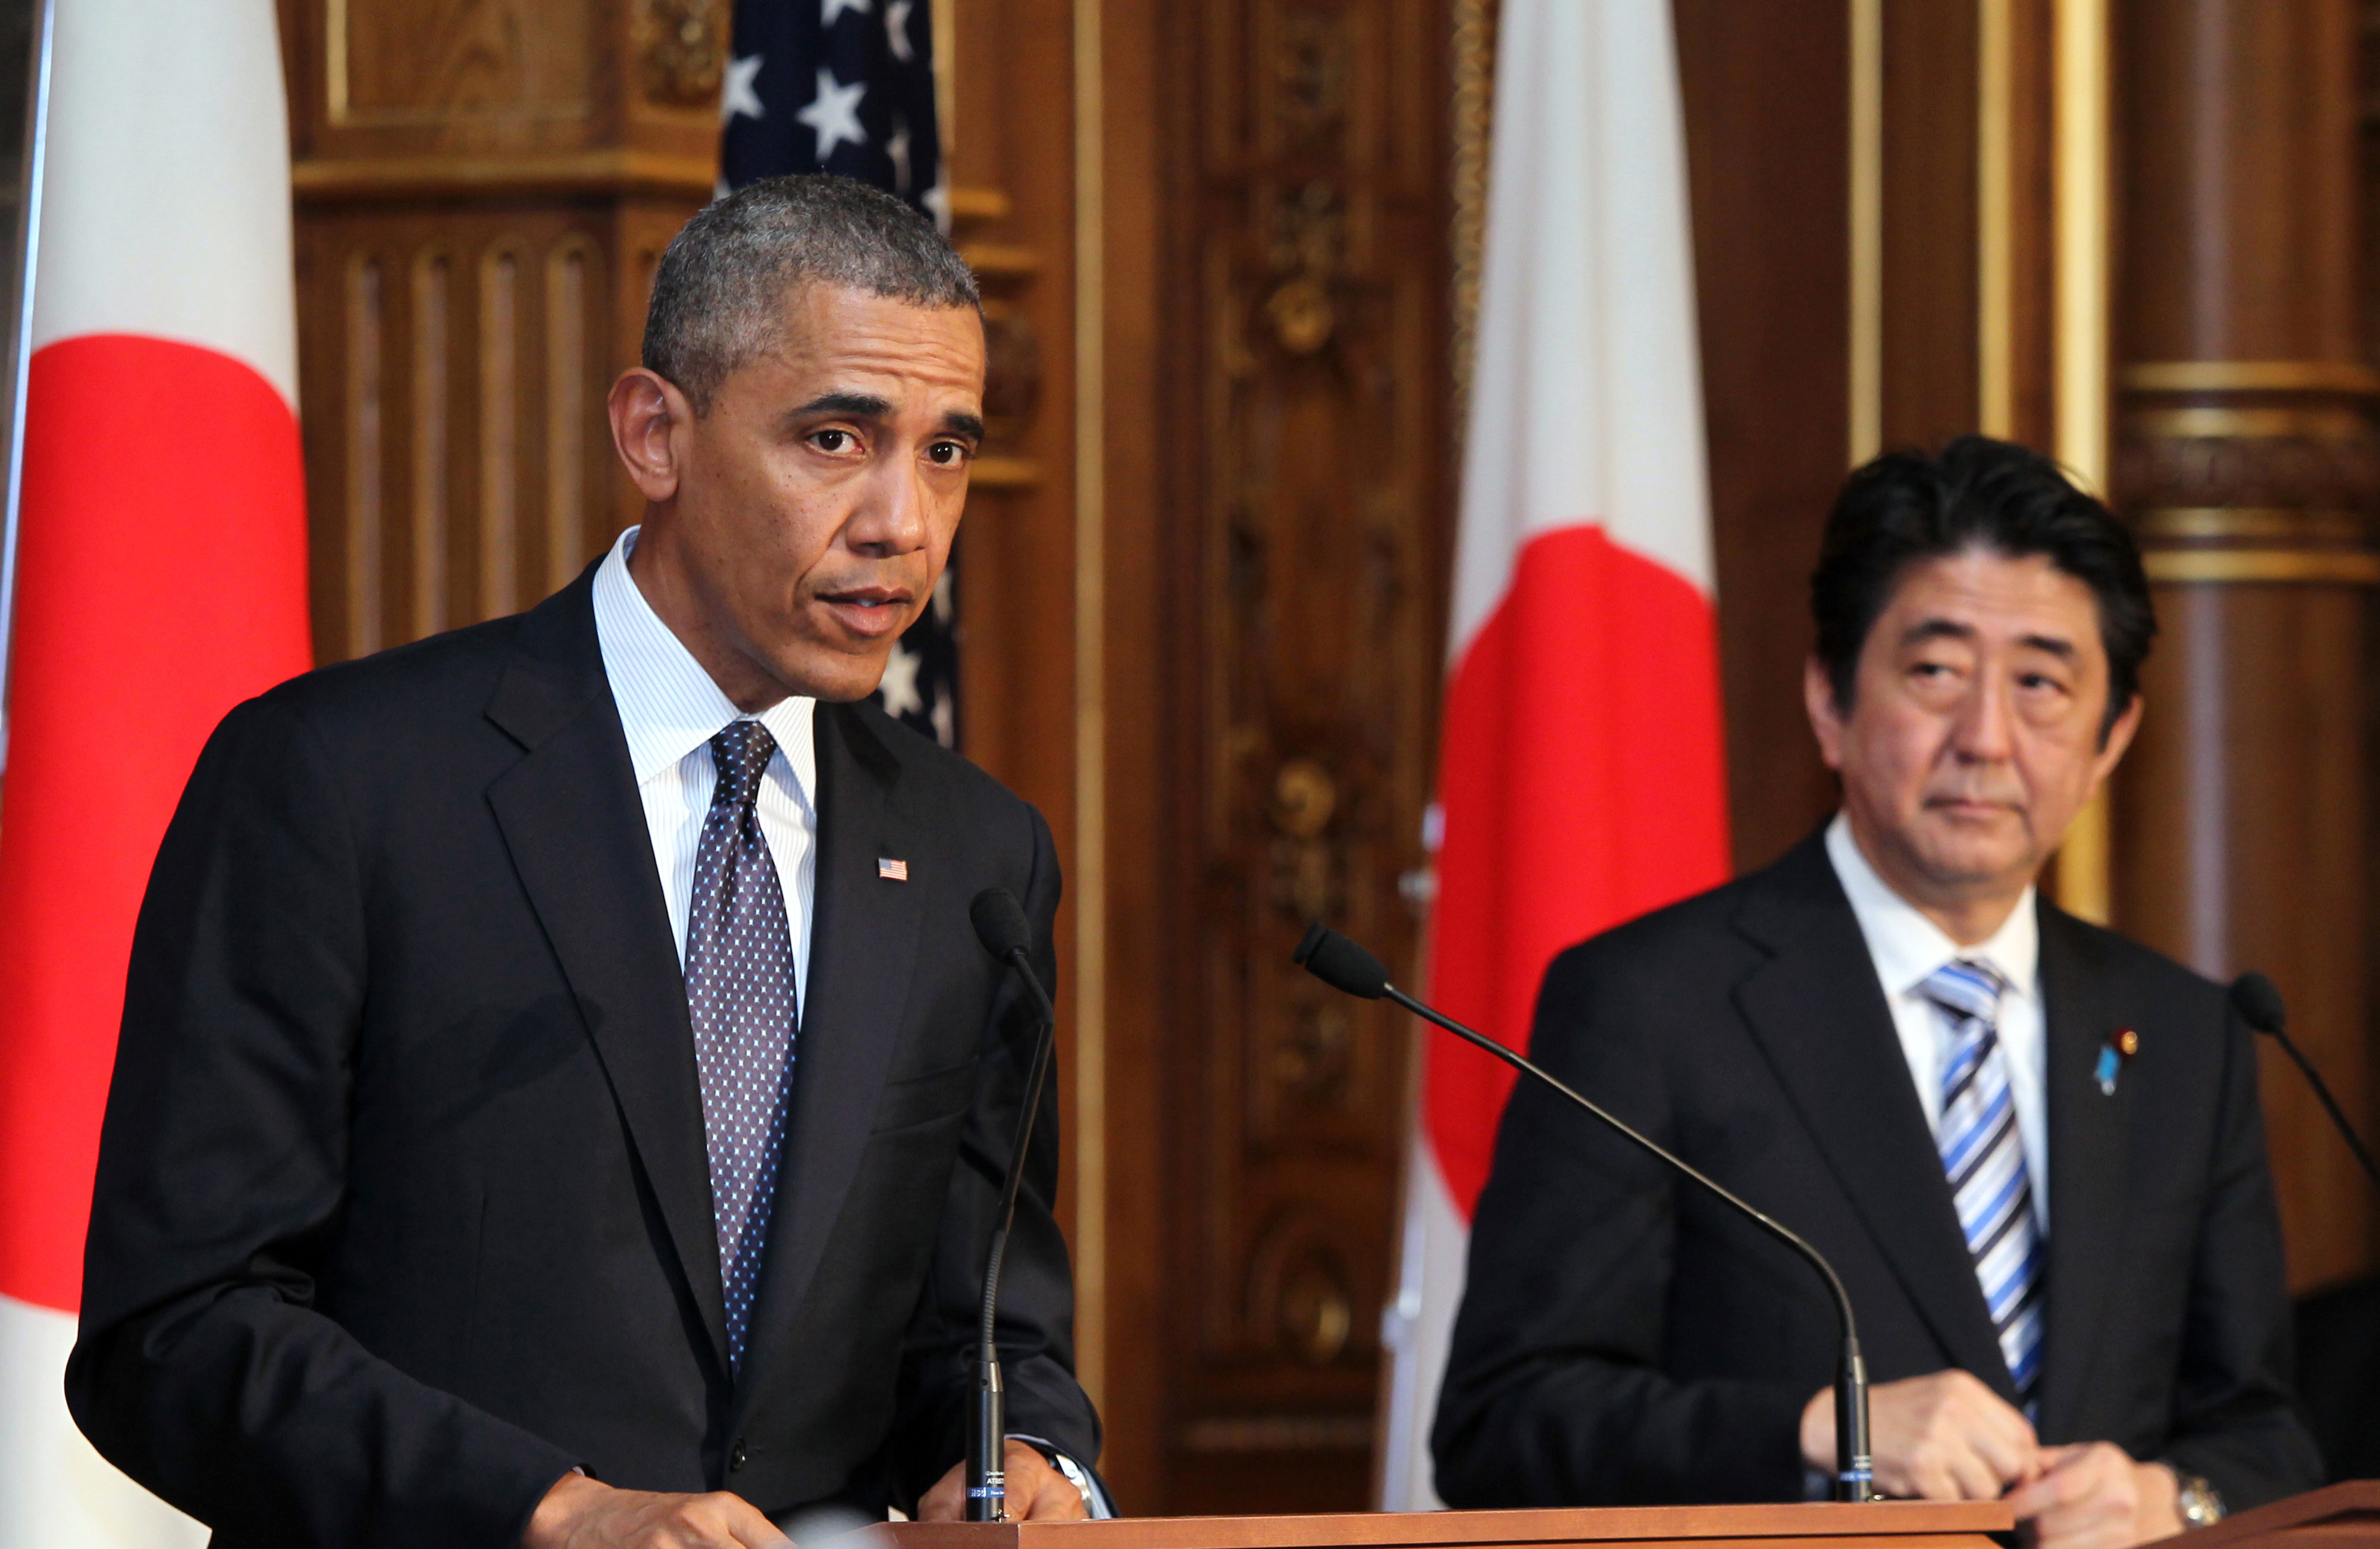 U.S. President Barack Obama, left, speaks as Shinzo Abe, Japan's prime minister, looks on during a joint news conference at the State Guest House in Tokyo, Japan, on Thursday, April 24, 2014. (Junko Kimura—Matsumoto/Pool/ Bloomberg)